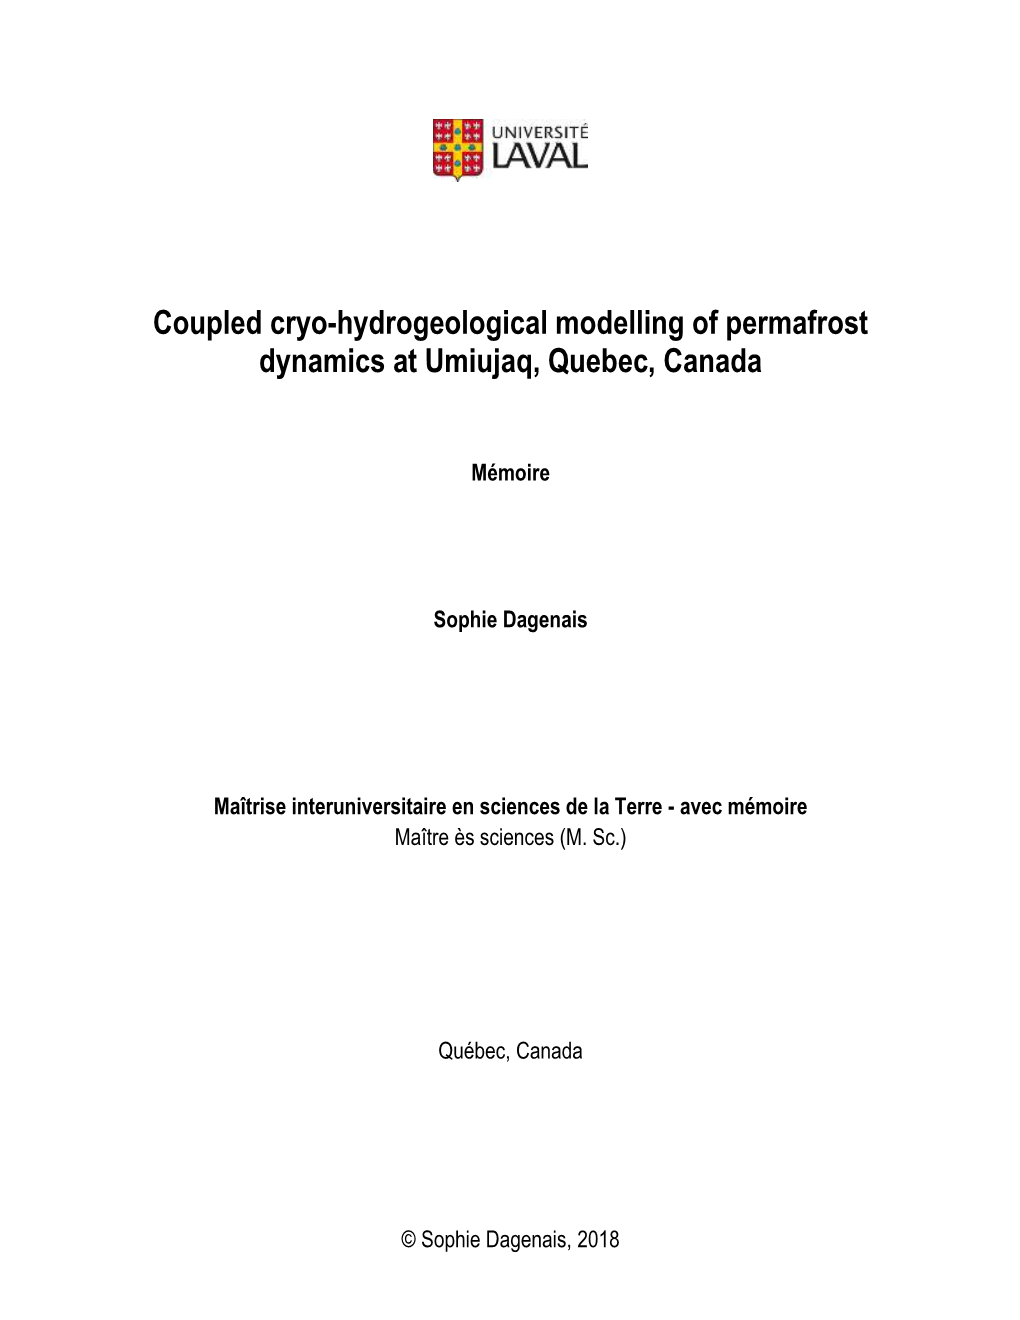 Coupled Cryo-Hydrogeological Modelling of Permafrost Dynamics at Umiujaq, Quebec, Canada